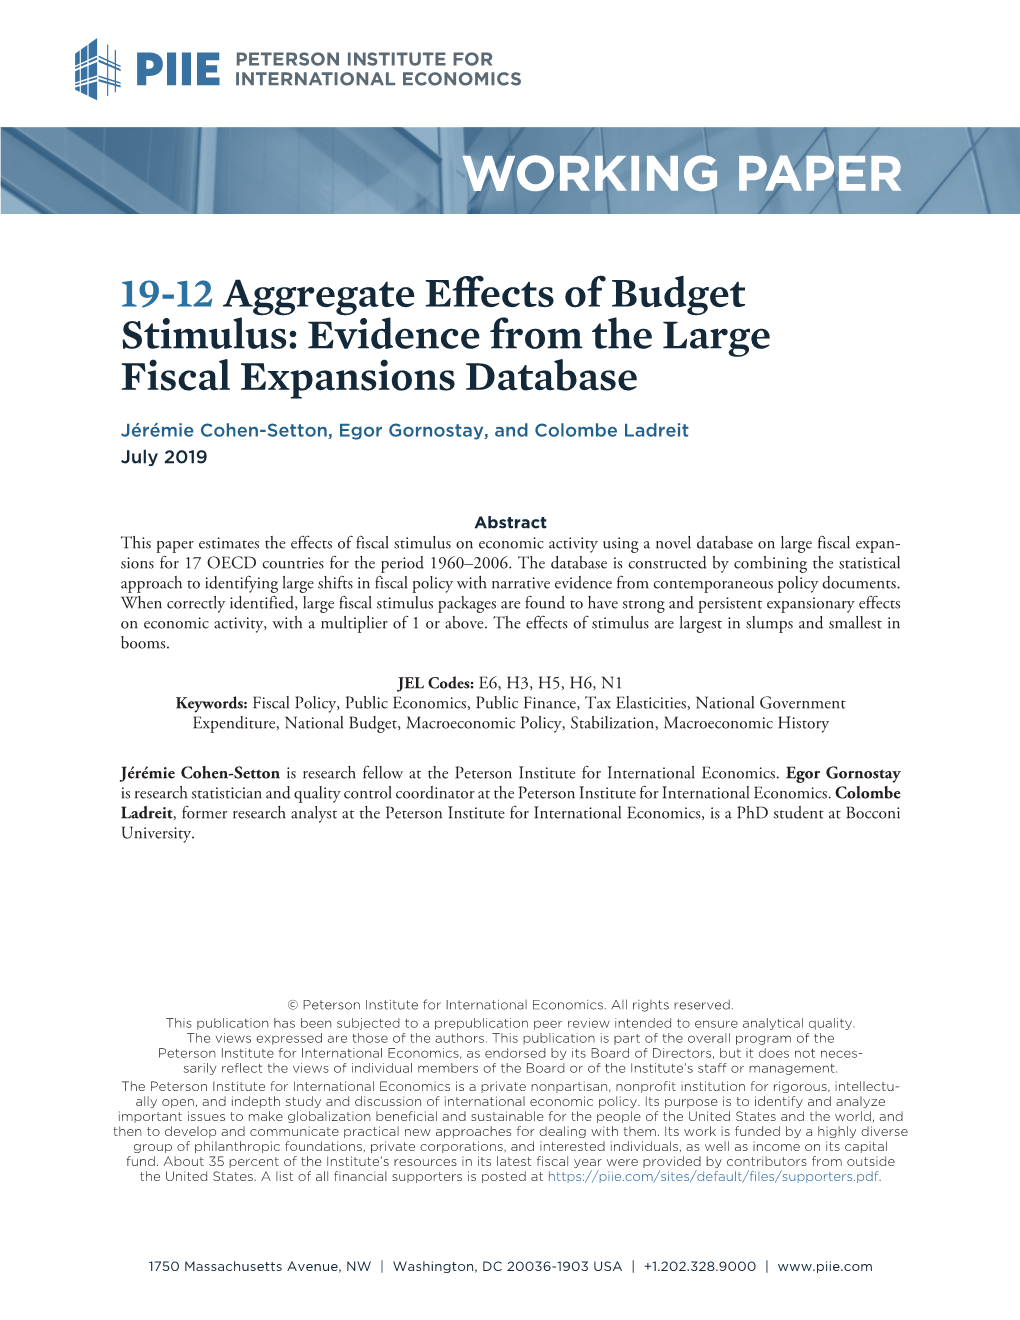 Aggregate Effects of Budget Stimulus: Evidence from the Large Fiscal Expansions Database